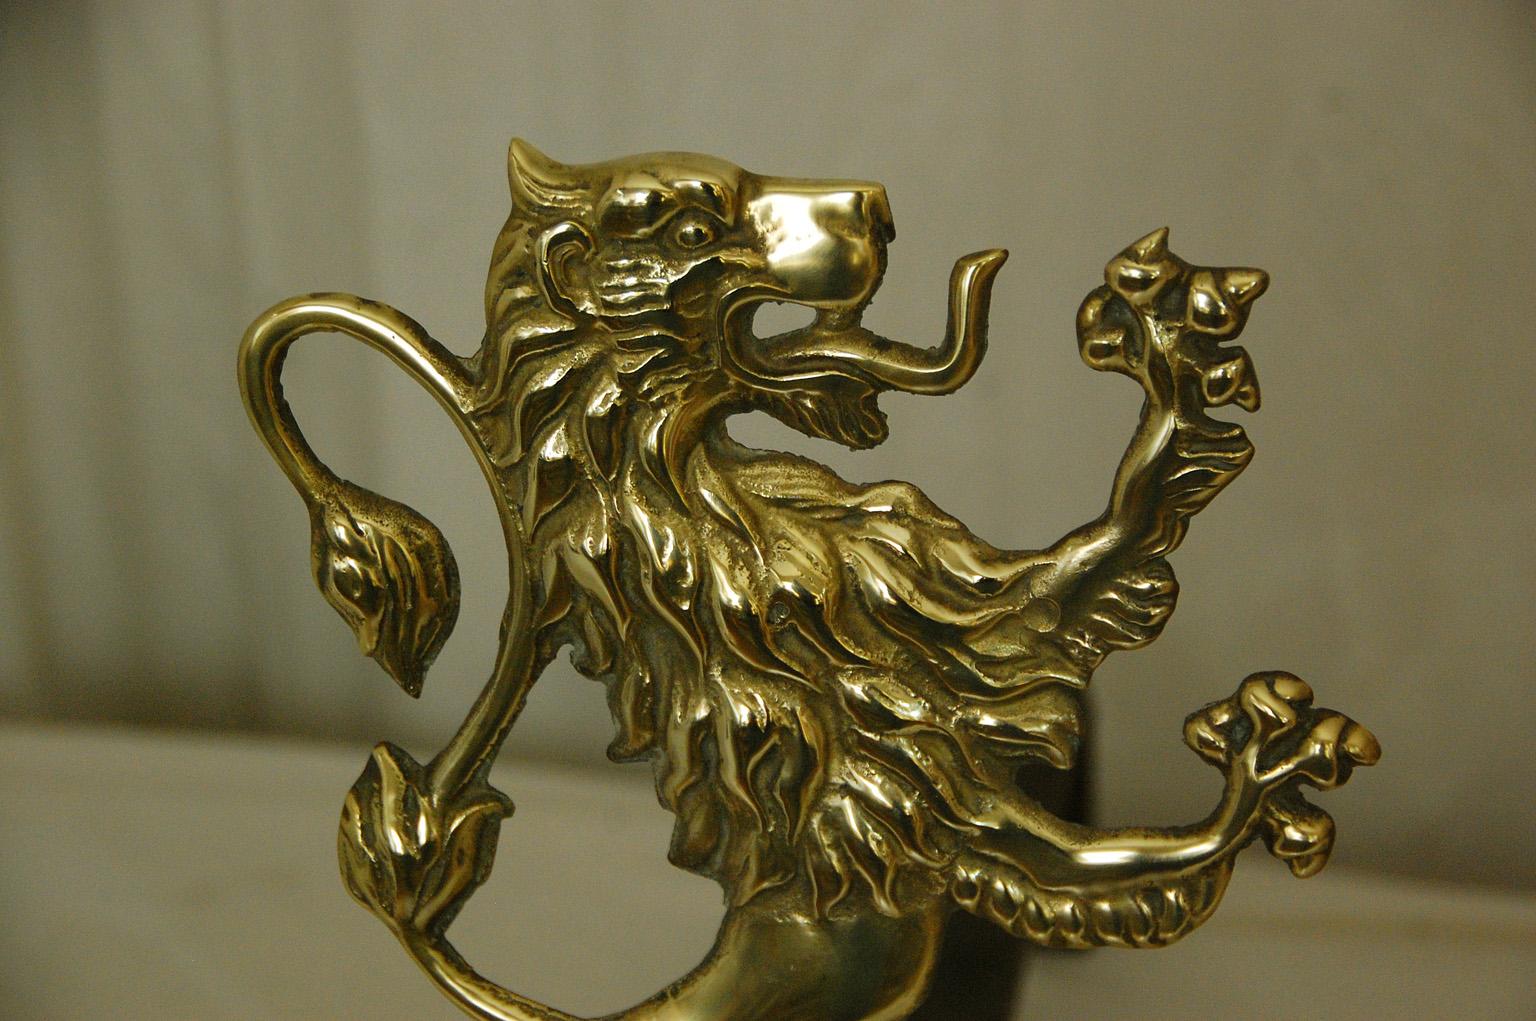 English or possibly American mid 19th century cast brass rampant lion andirons with iron log holders, and cast brass log stops. These beautifully cast lions are finely detailed. The iron log holders have been replaced sometime within the last 100